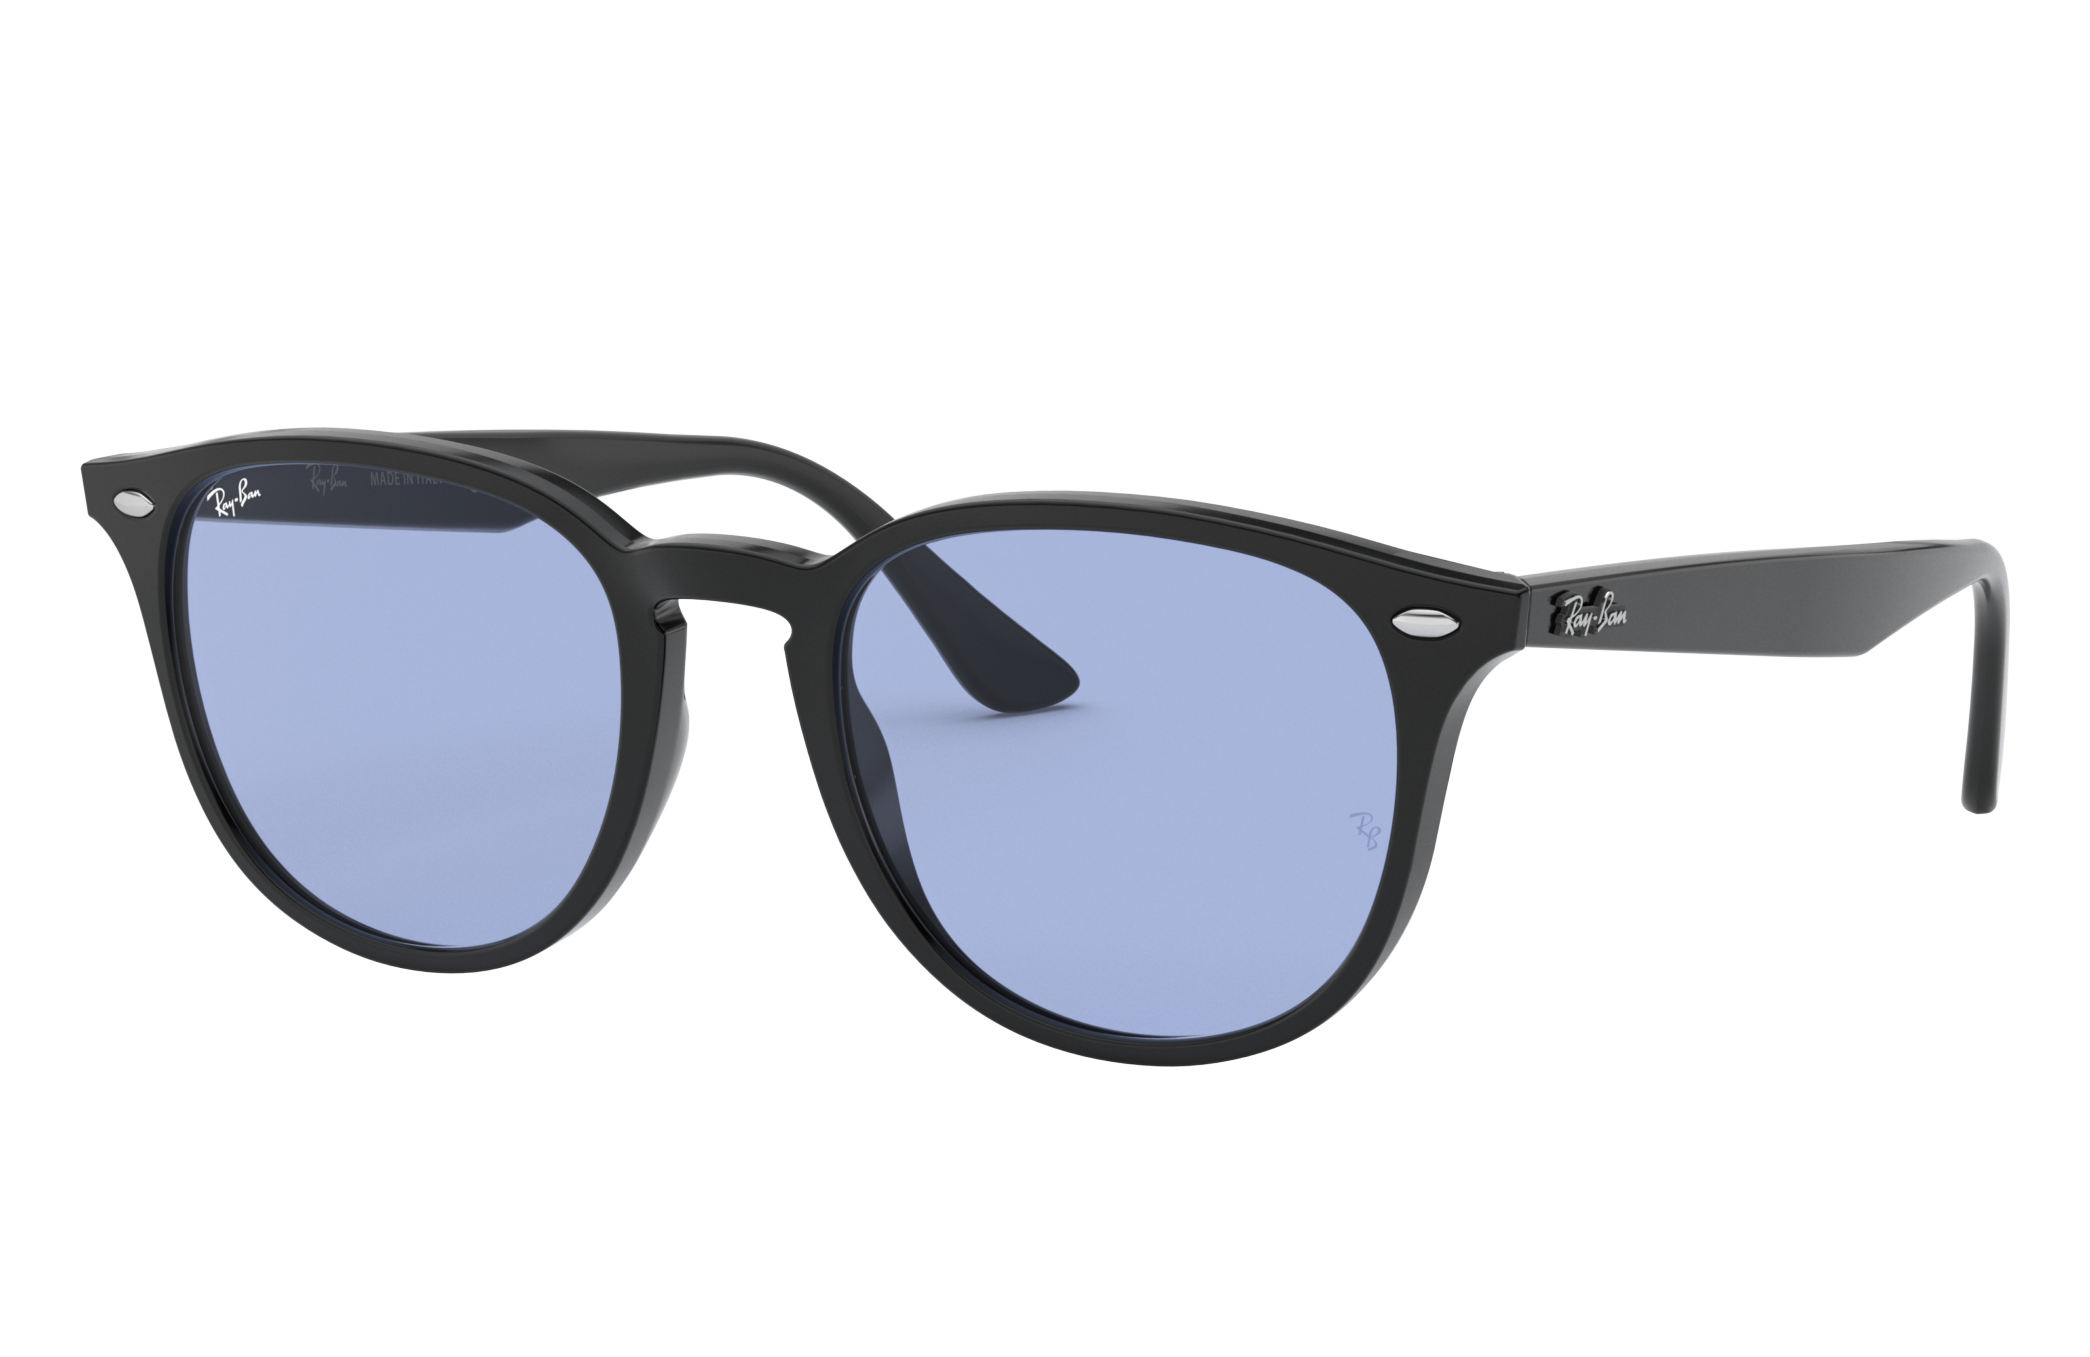 Check out the Rb4259 Washed Lenses Low Bridge Fit at ray-ban.com